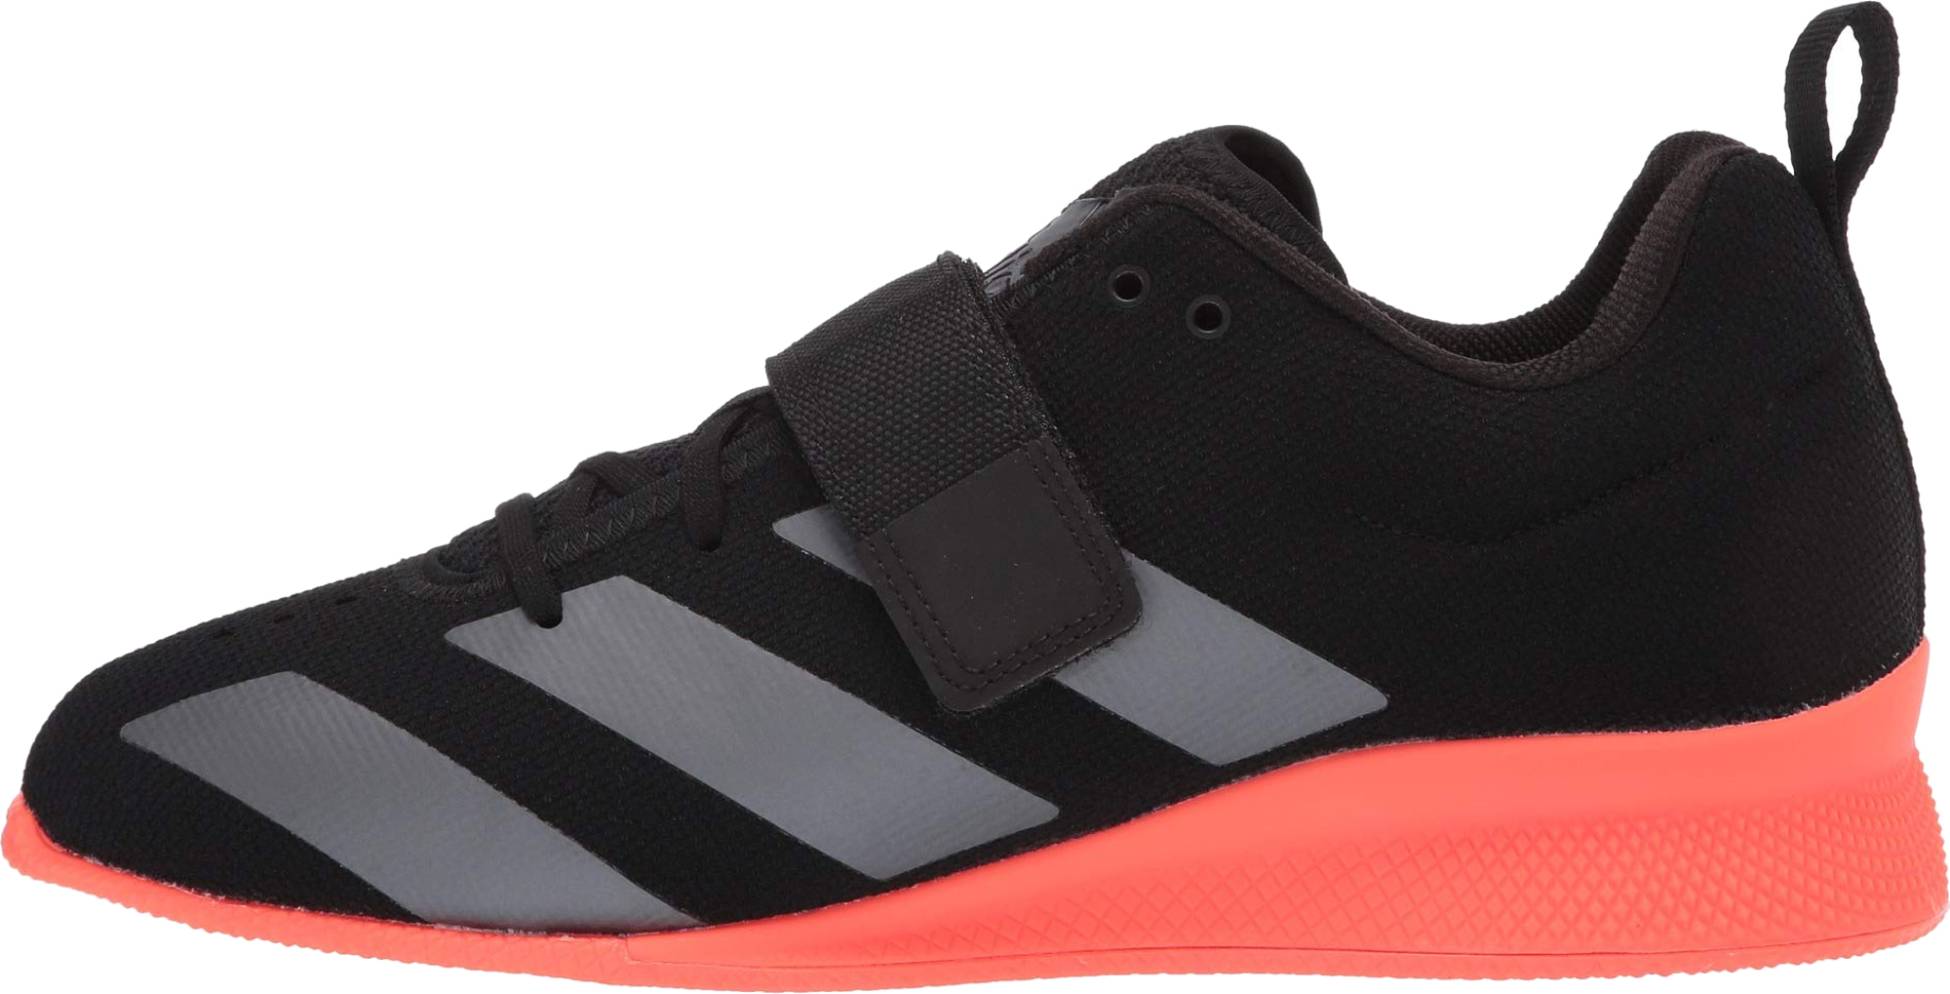 Save 66% on Weightlifting Shoes (24 